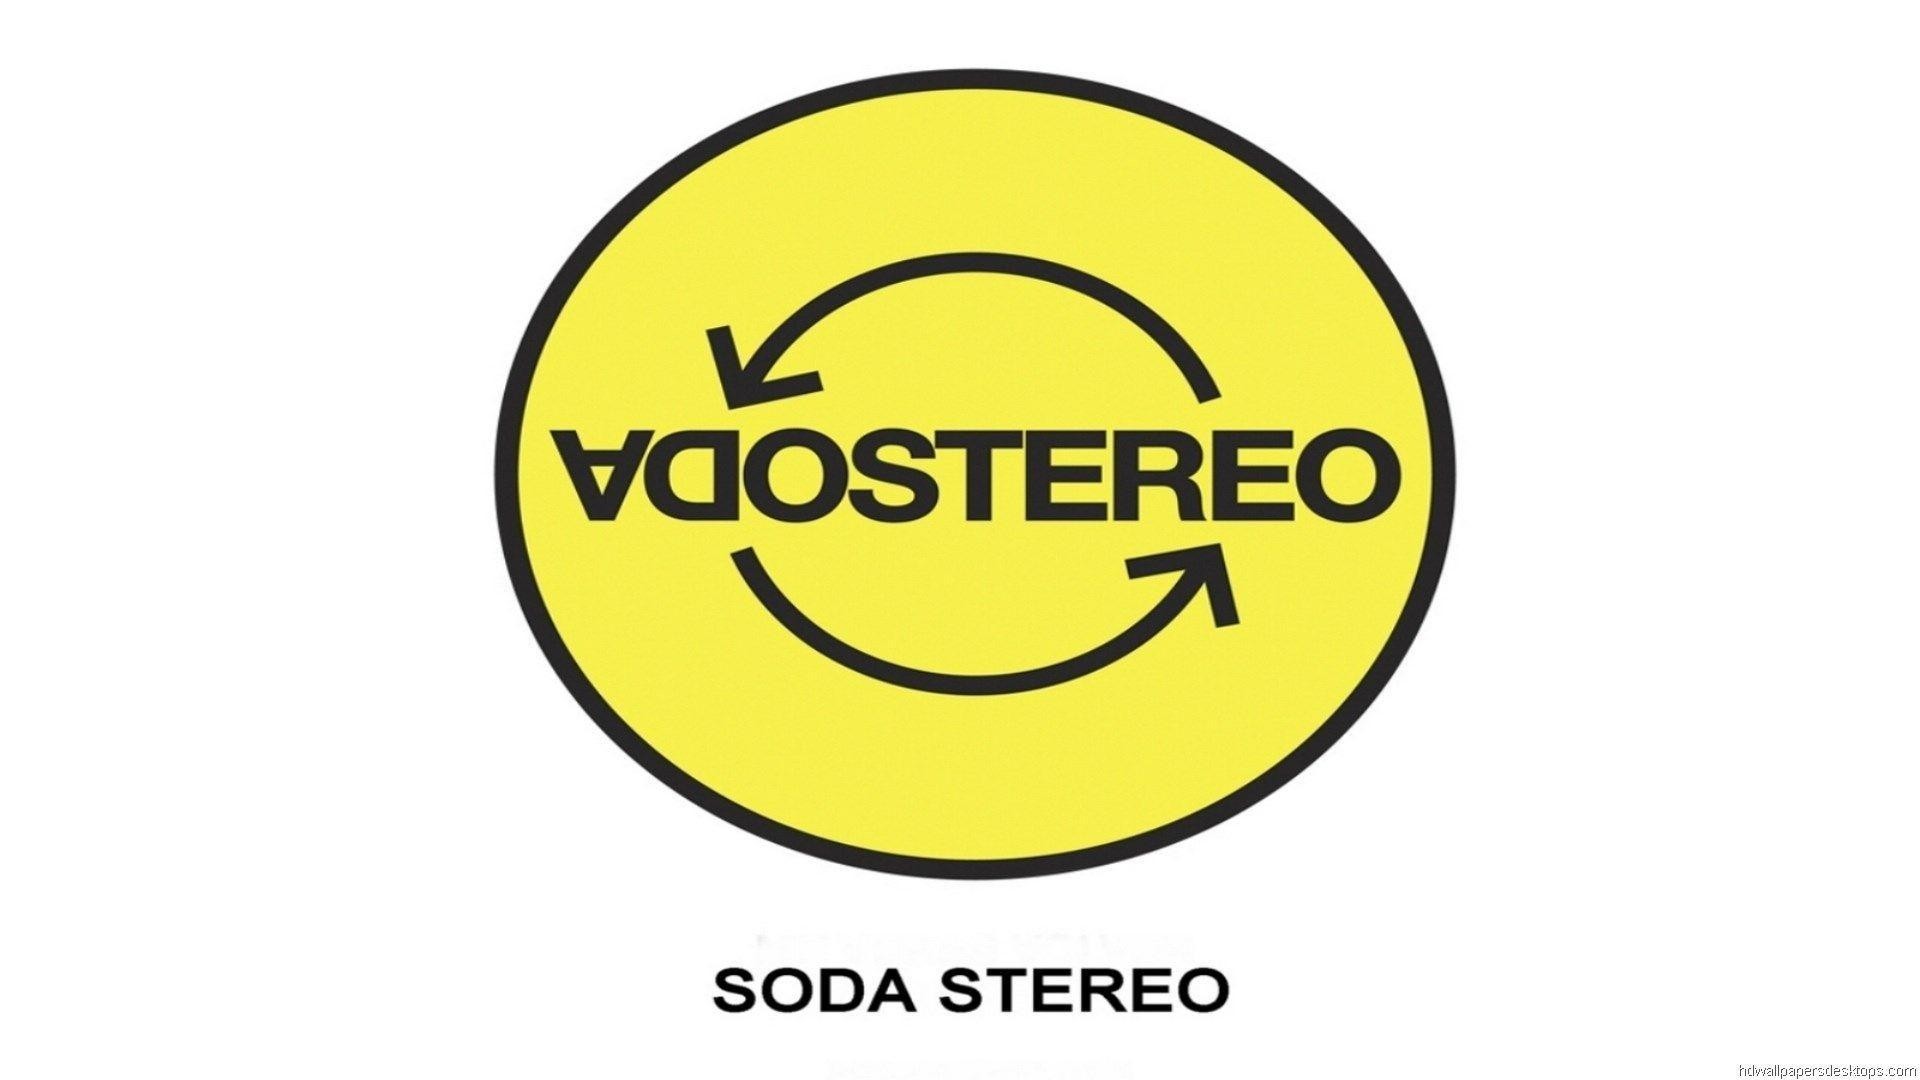 1920x1080 soda stereo wallpapers hd Â» Wallppapers Gallery